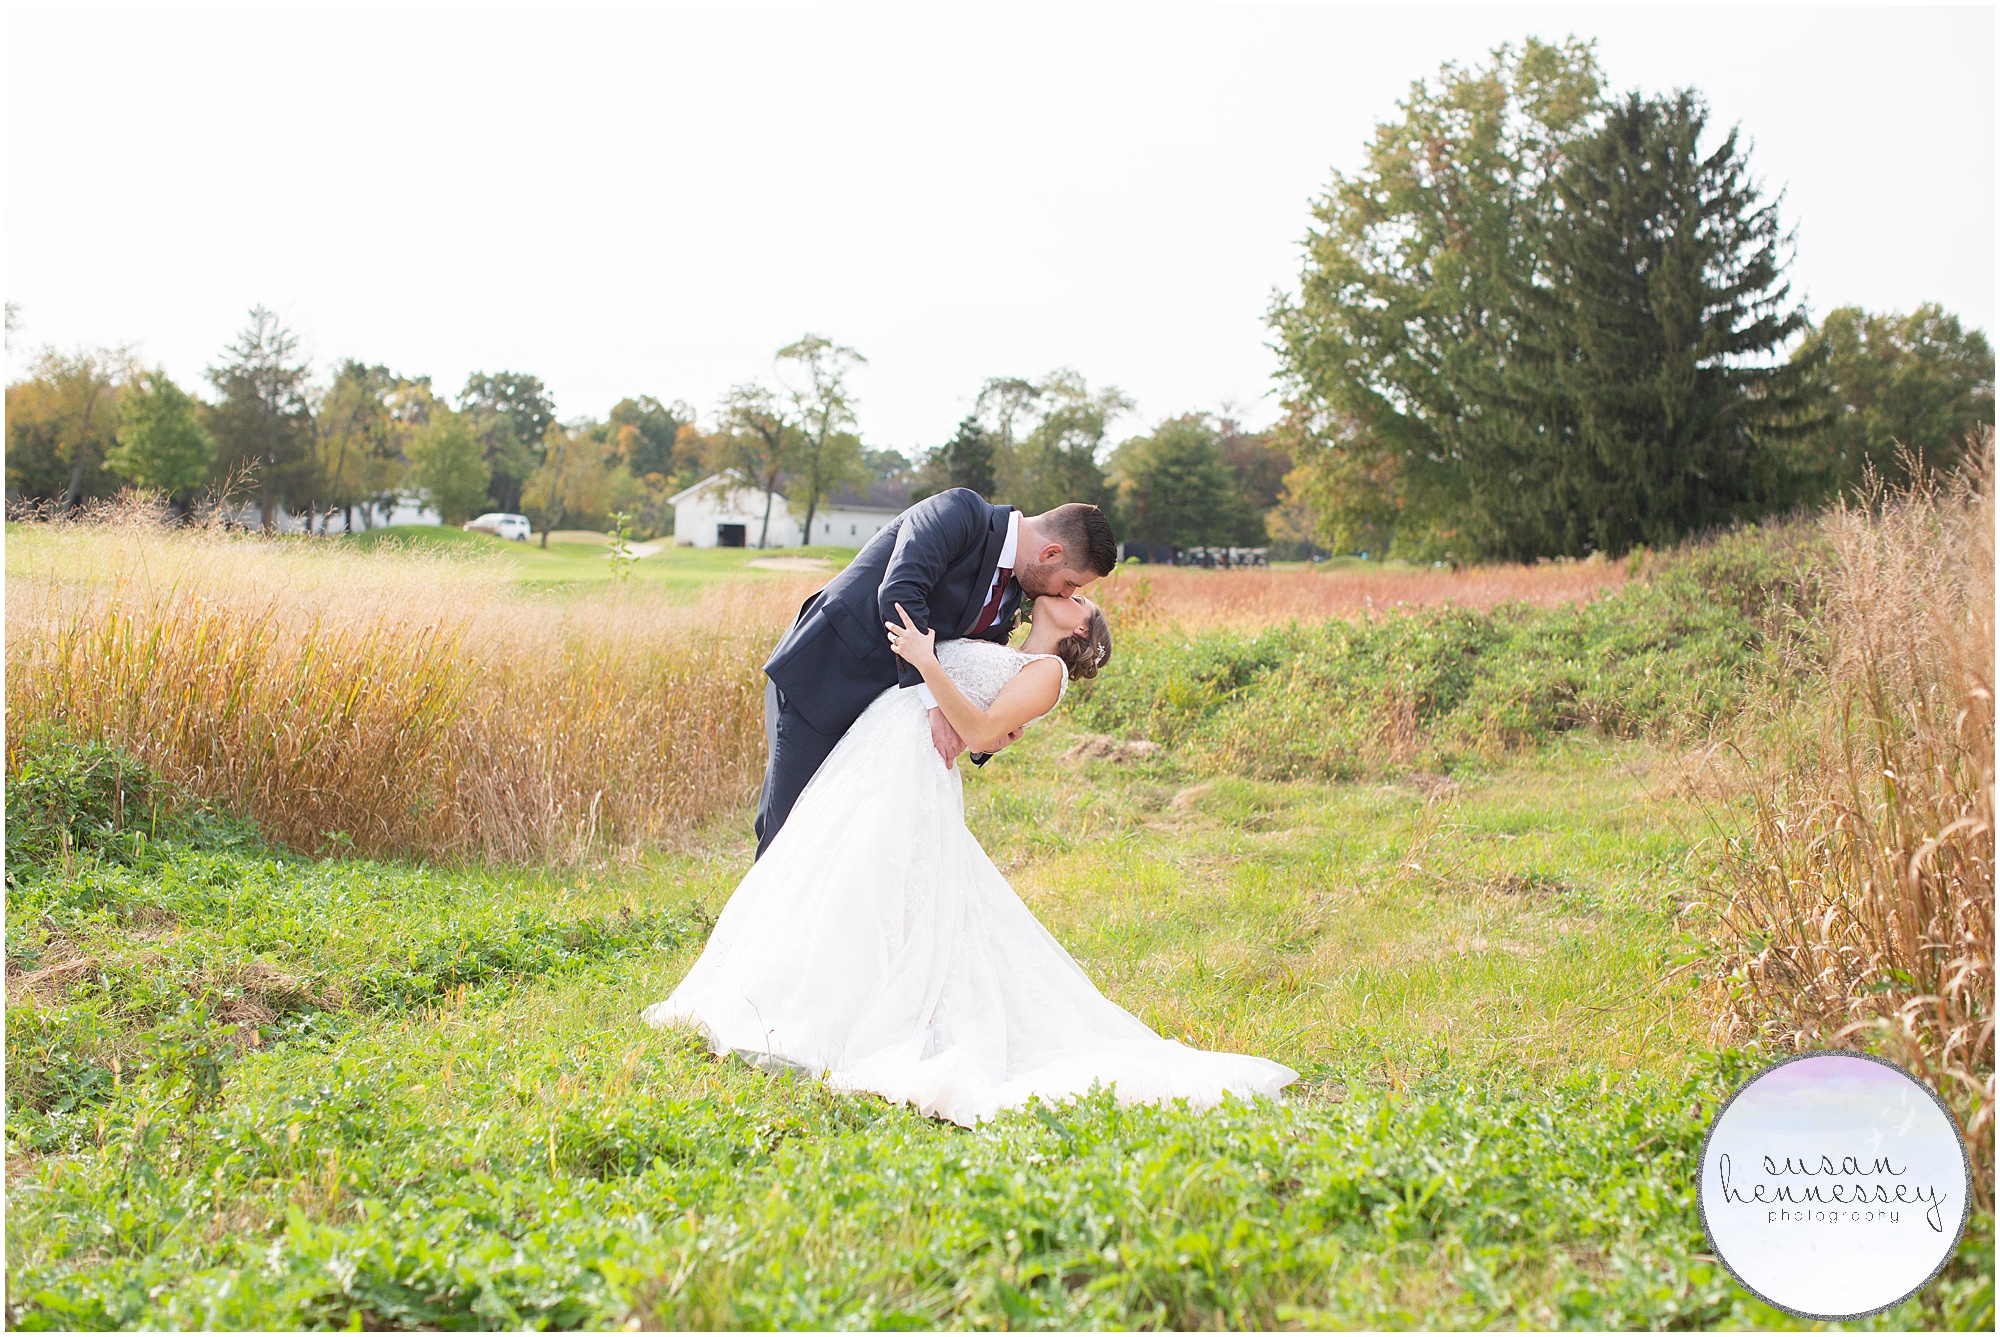 Romantic outdoor portraits at wedding at Old York Country Club